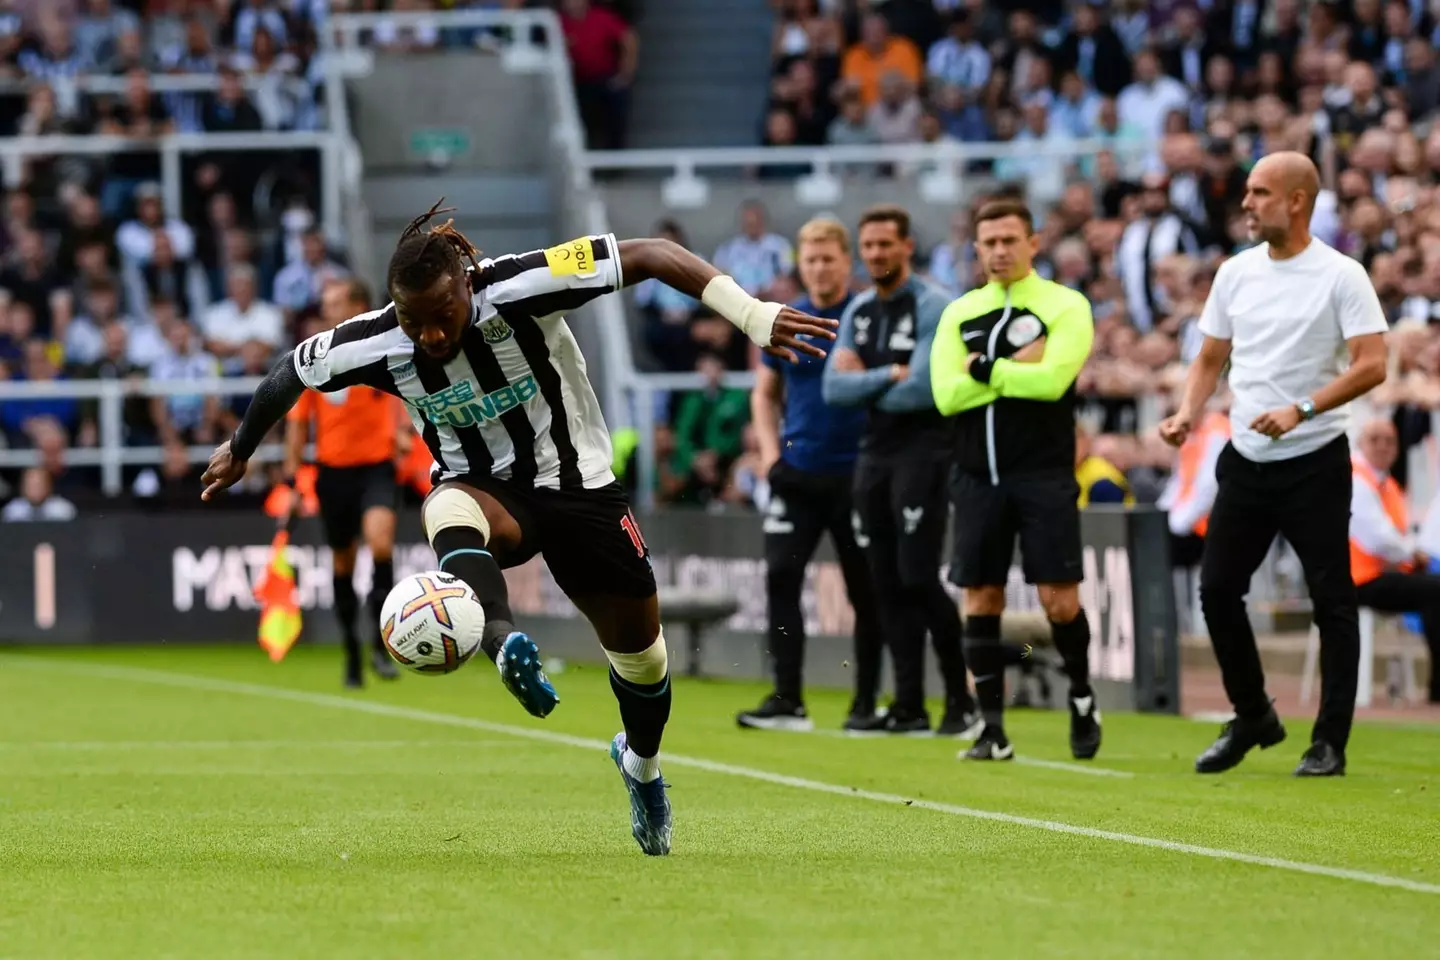 Allan Saint-Maximin in action for Newcastle (Twitter)